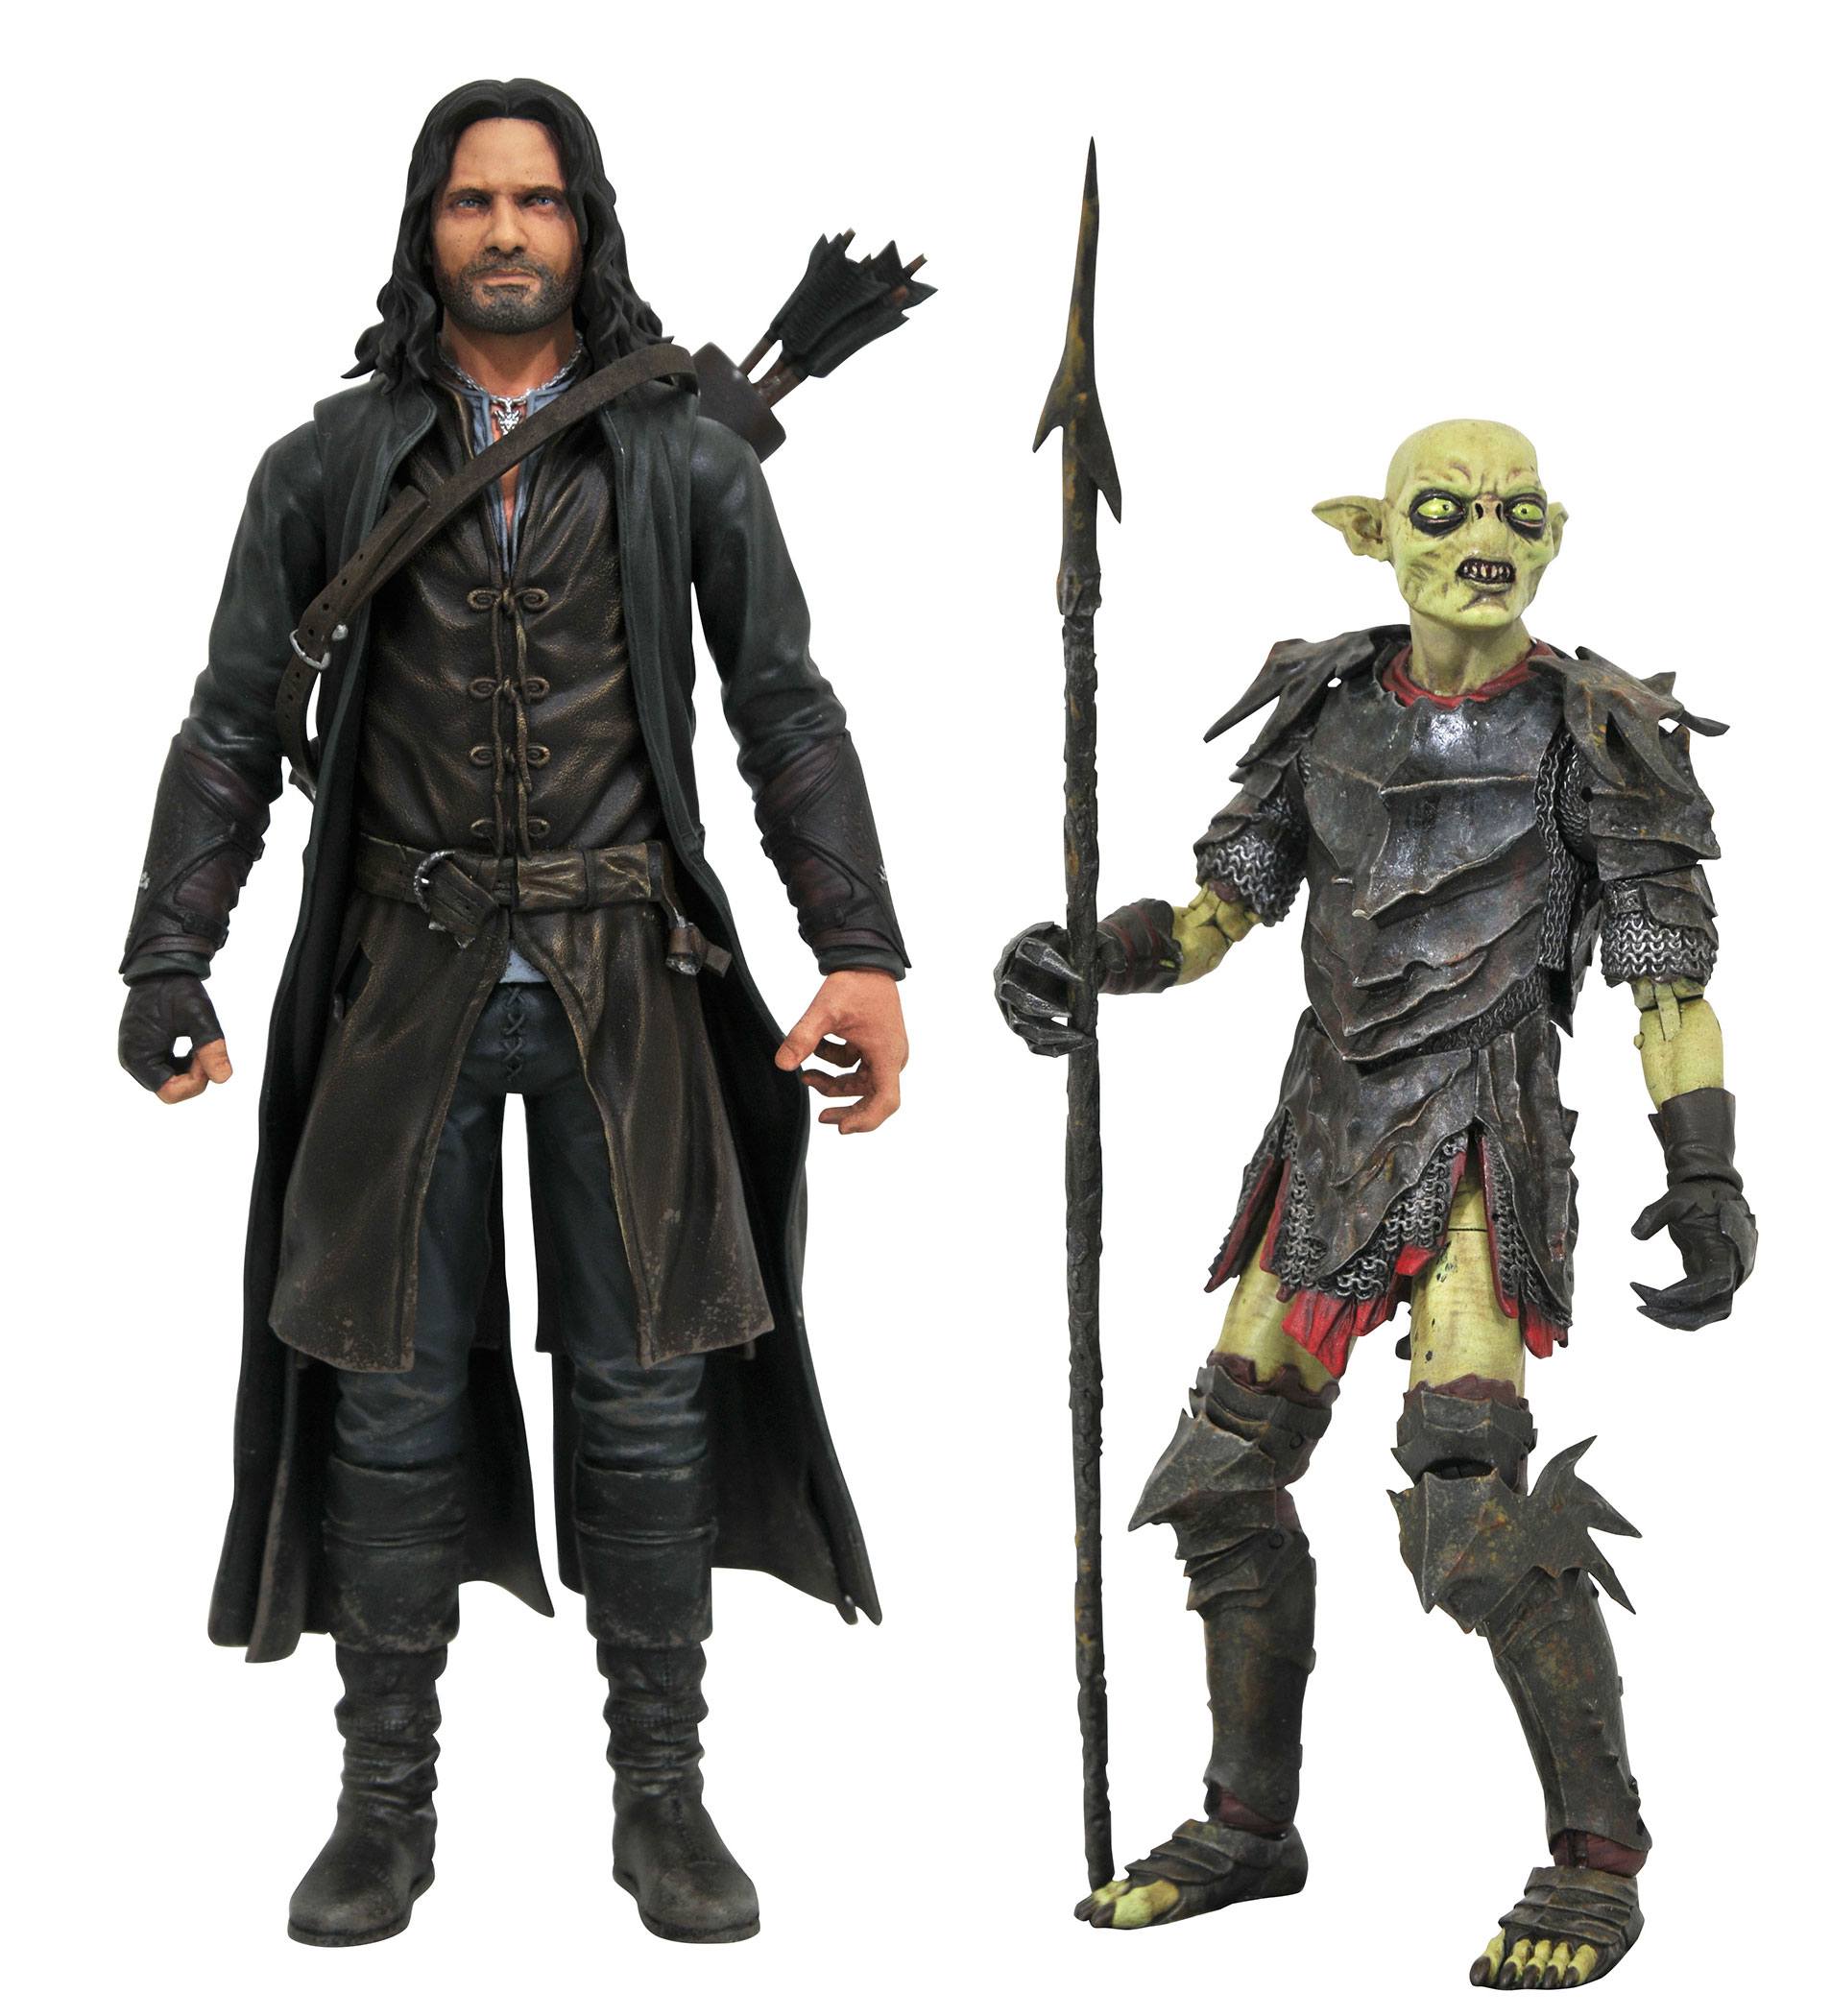 Lord of the Rings Select Actionfiguren 2-Pack  18 cm Aragorn & Orc DIAMAPR212365 699788844748